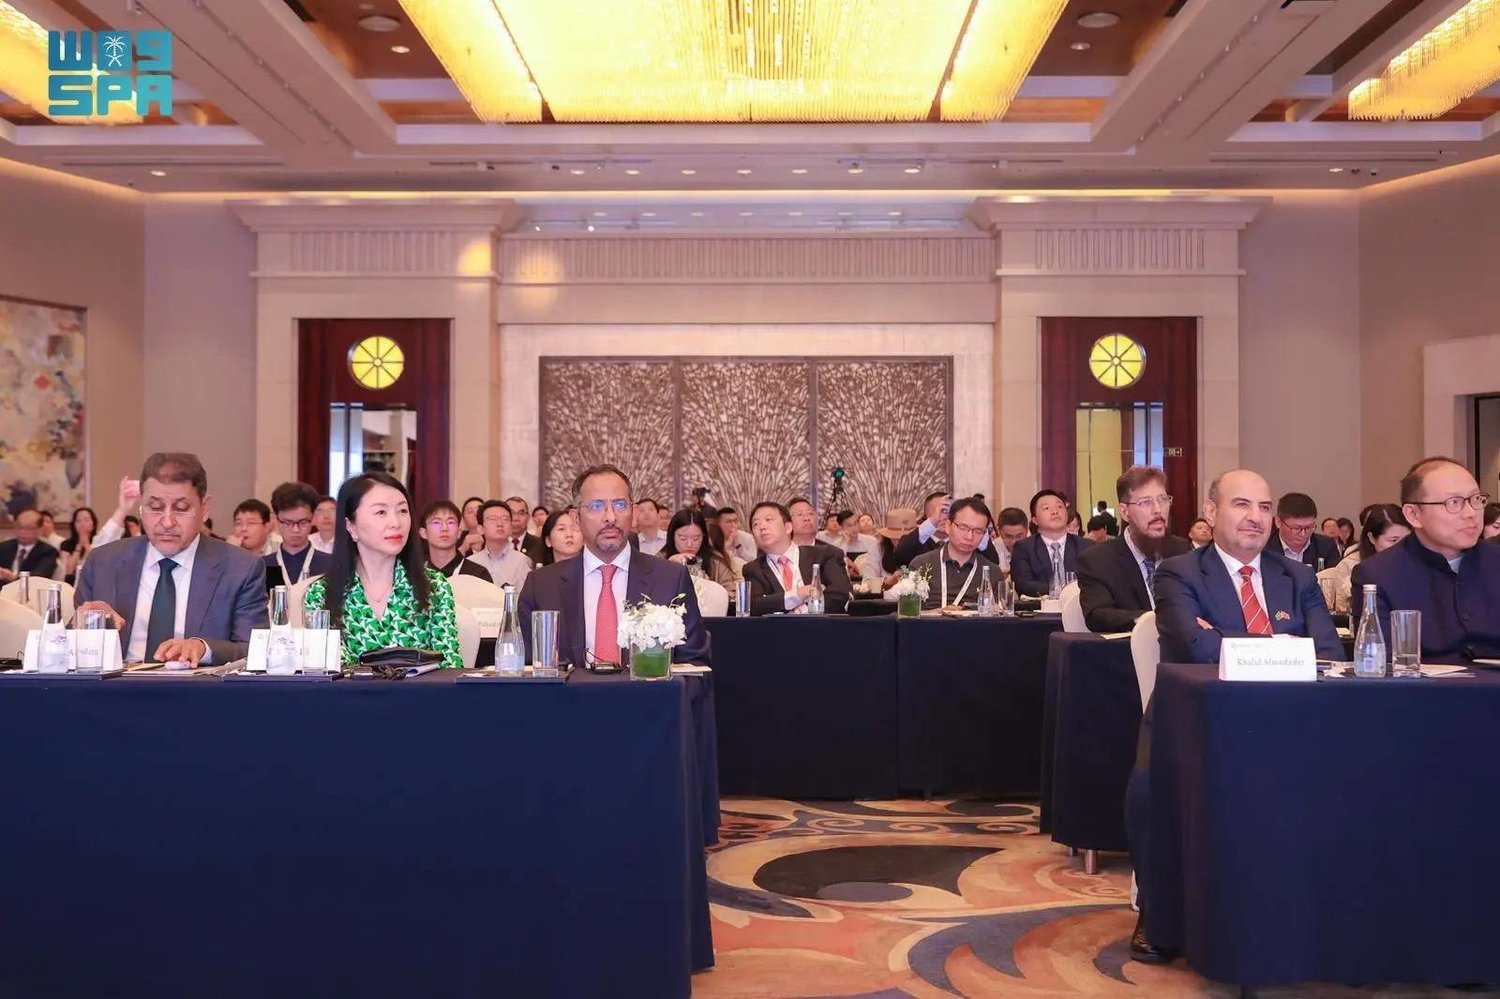 Saudi Minister of Industry and Mineral Resources Bandar Ibrahim Alkhorayef met with Chinese investors in Shanghai.